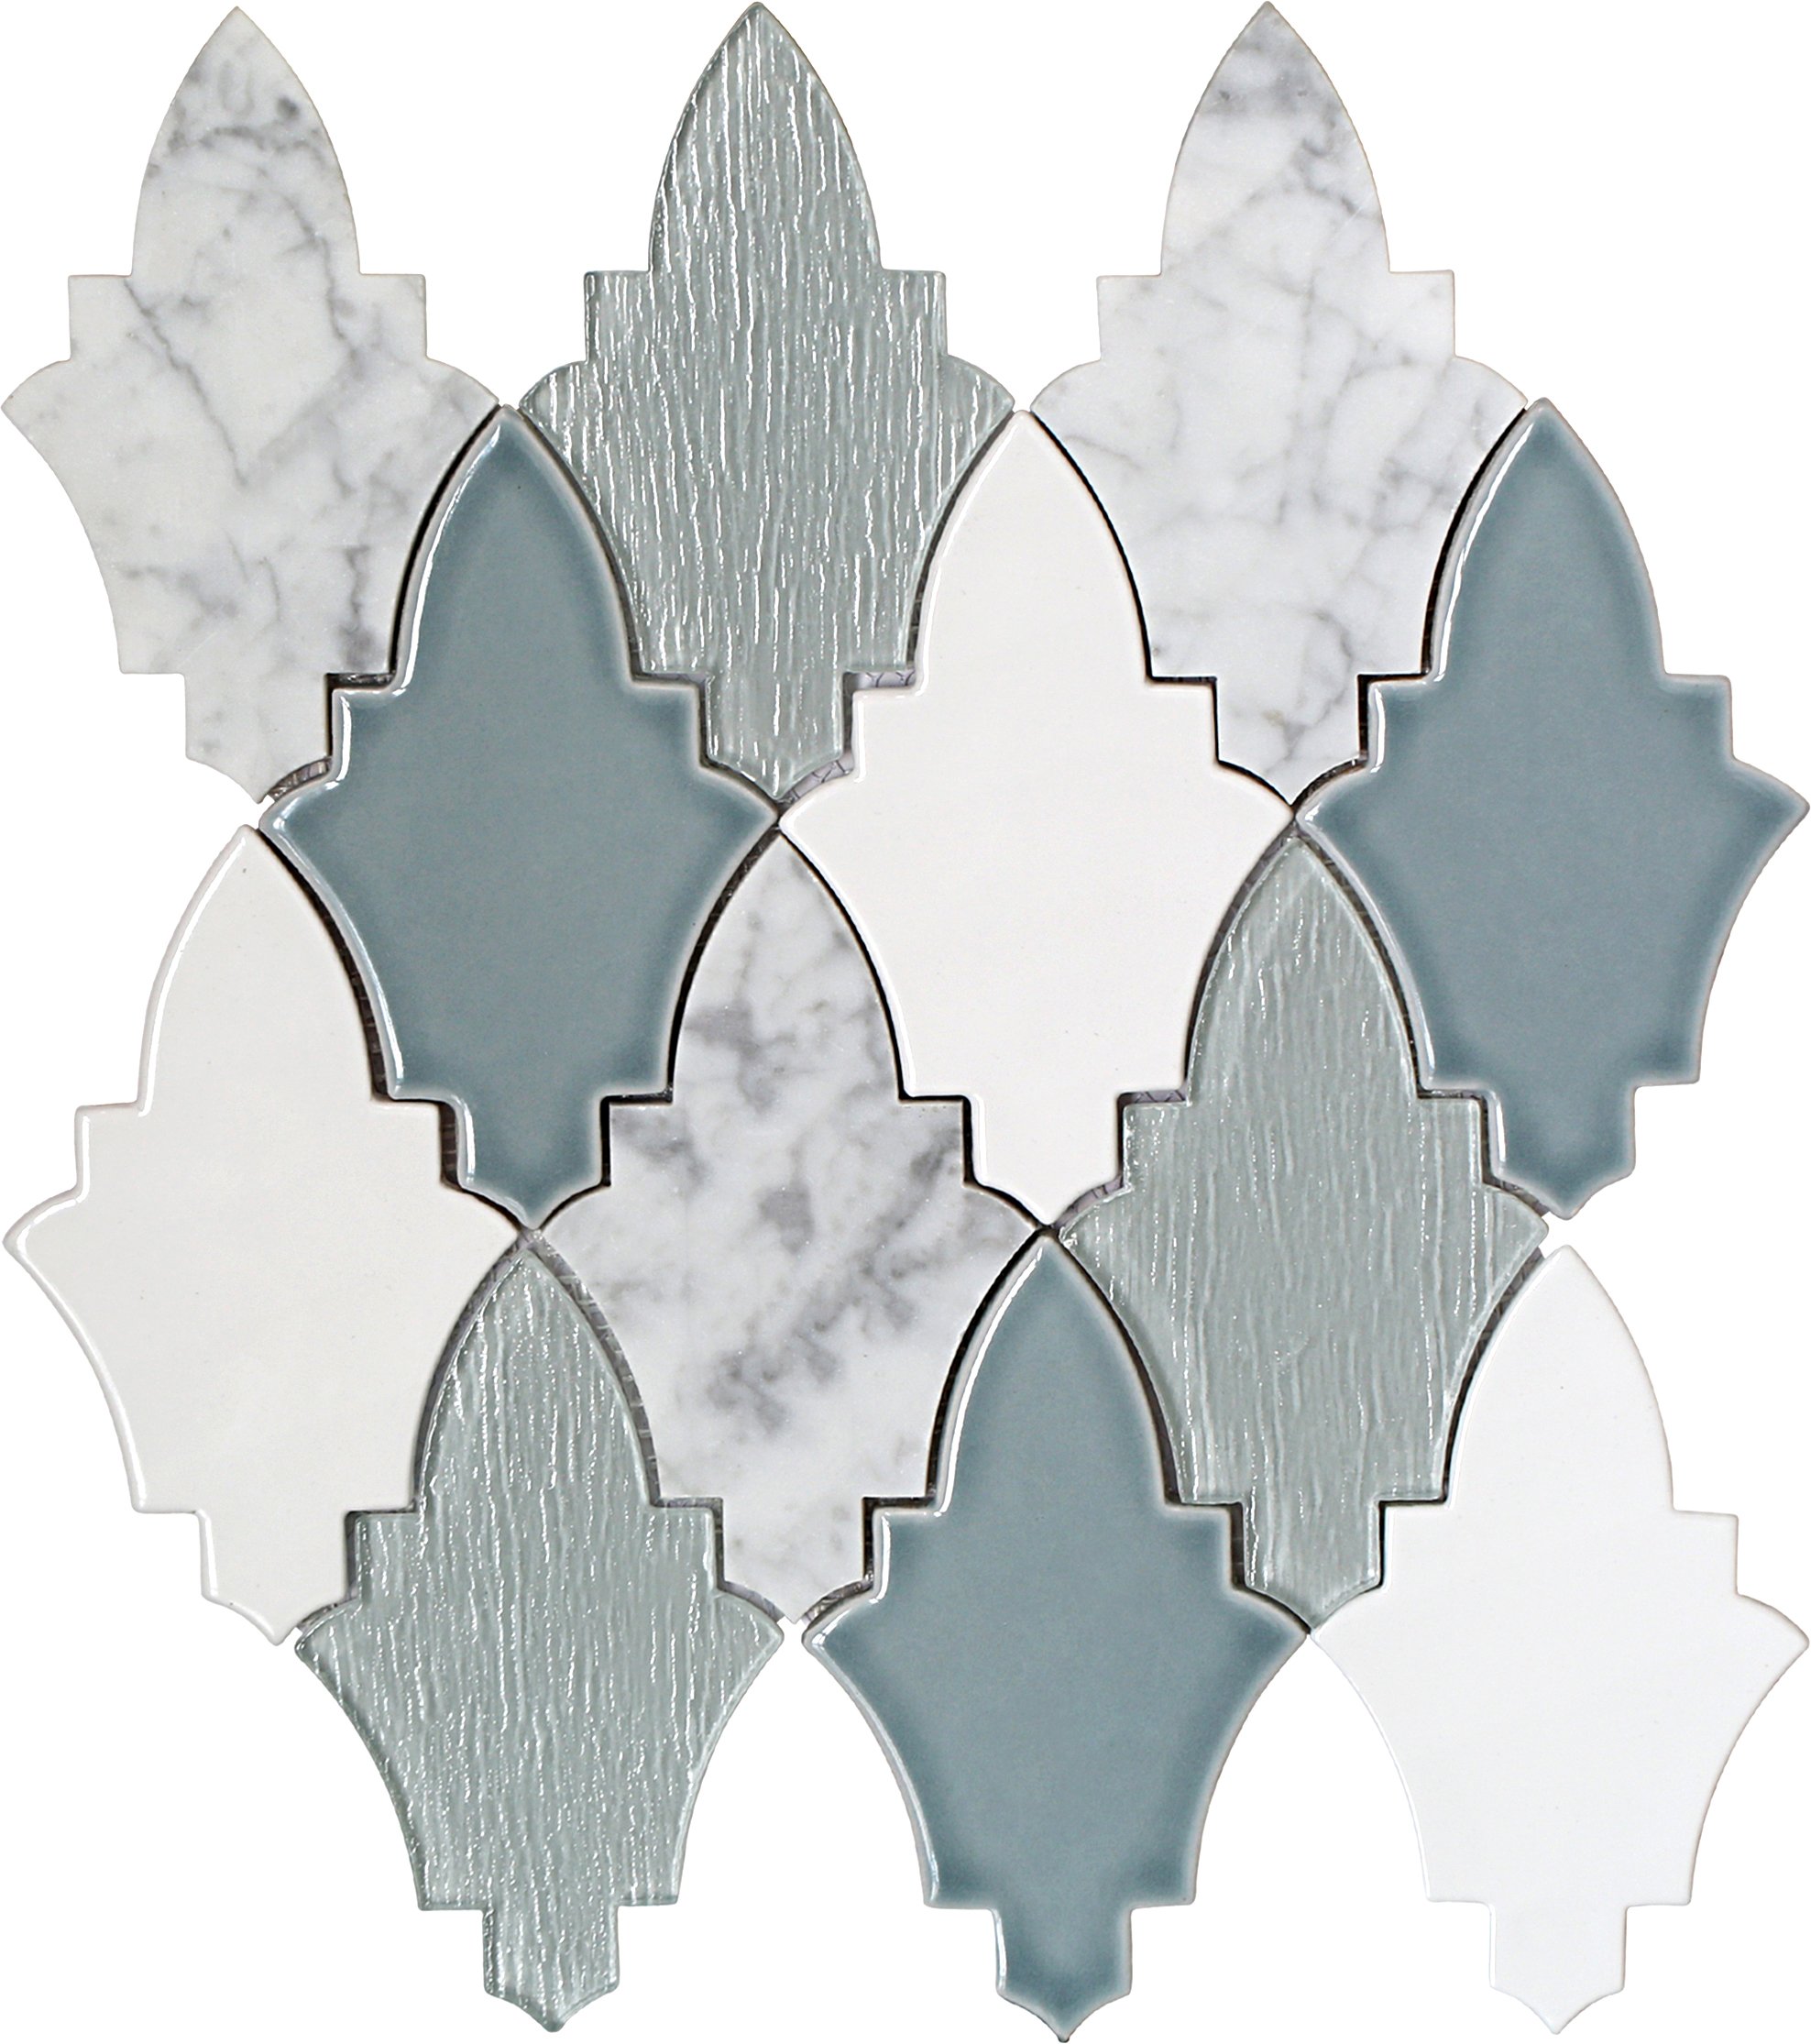 Emser Fleur Viole stone, ceramic and glass mix mosaic tile 11X12 gloss W94FLEUVI1112MO is an Emser tile product.  Emser Tile Fleur is a modified arabesque mosaic tile and its composed of stone, ceramic and glass.   This gorgeous Emser tile Fleur or flower